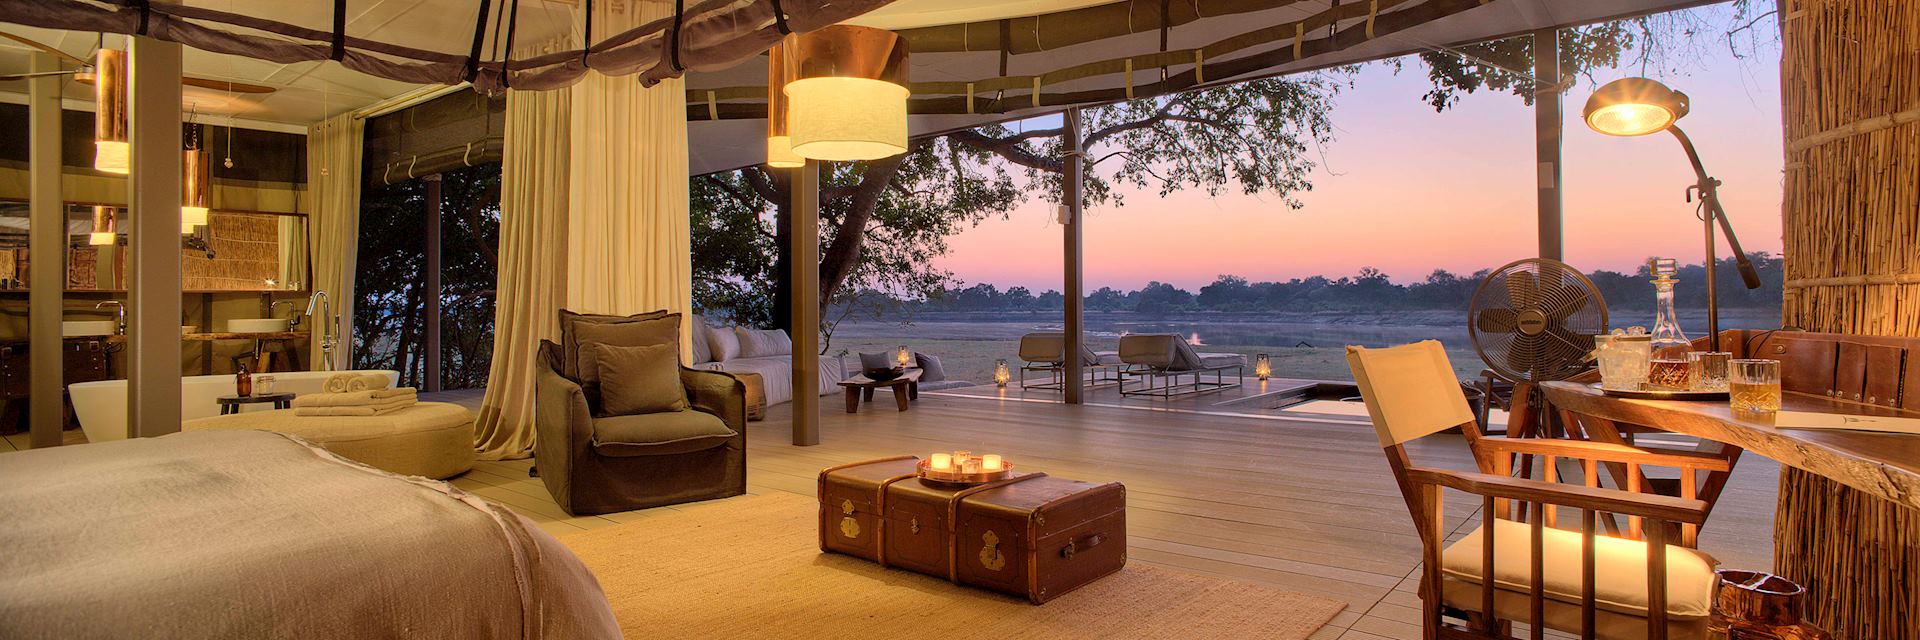 View from Chinzombo Camp, South Luangwa National Park